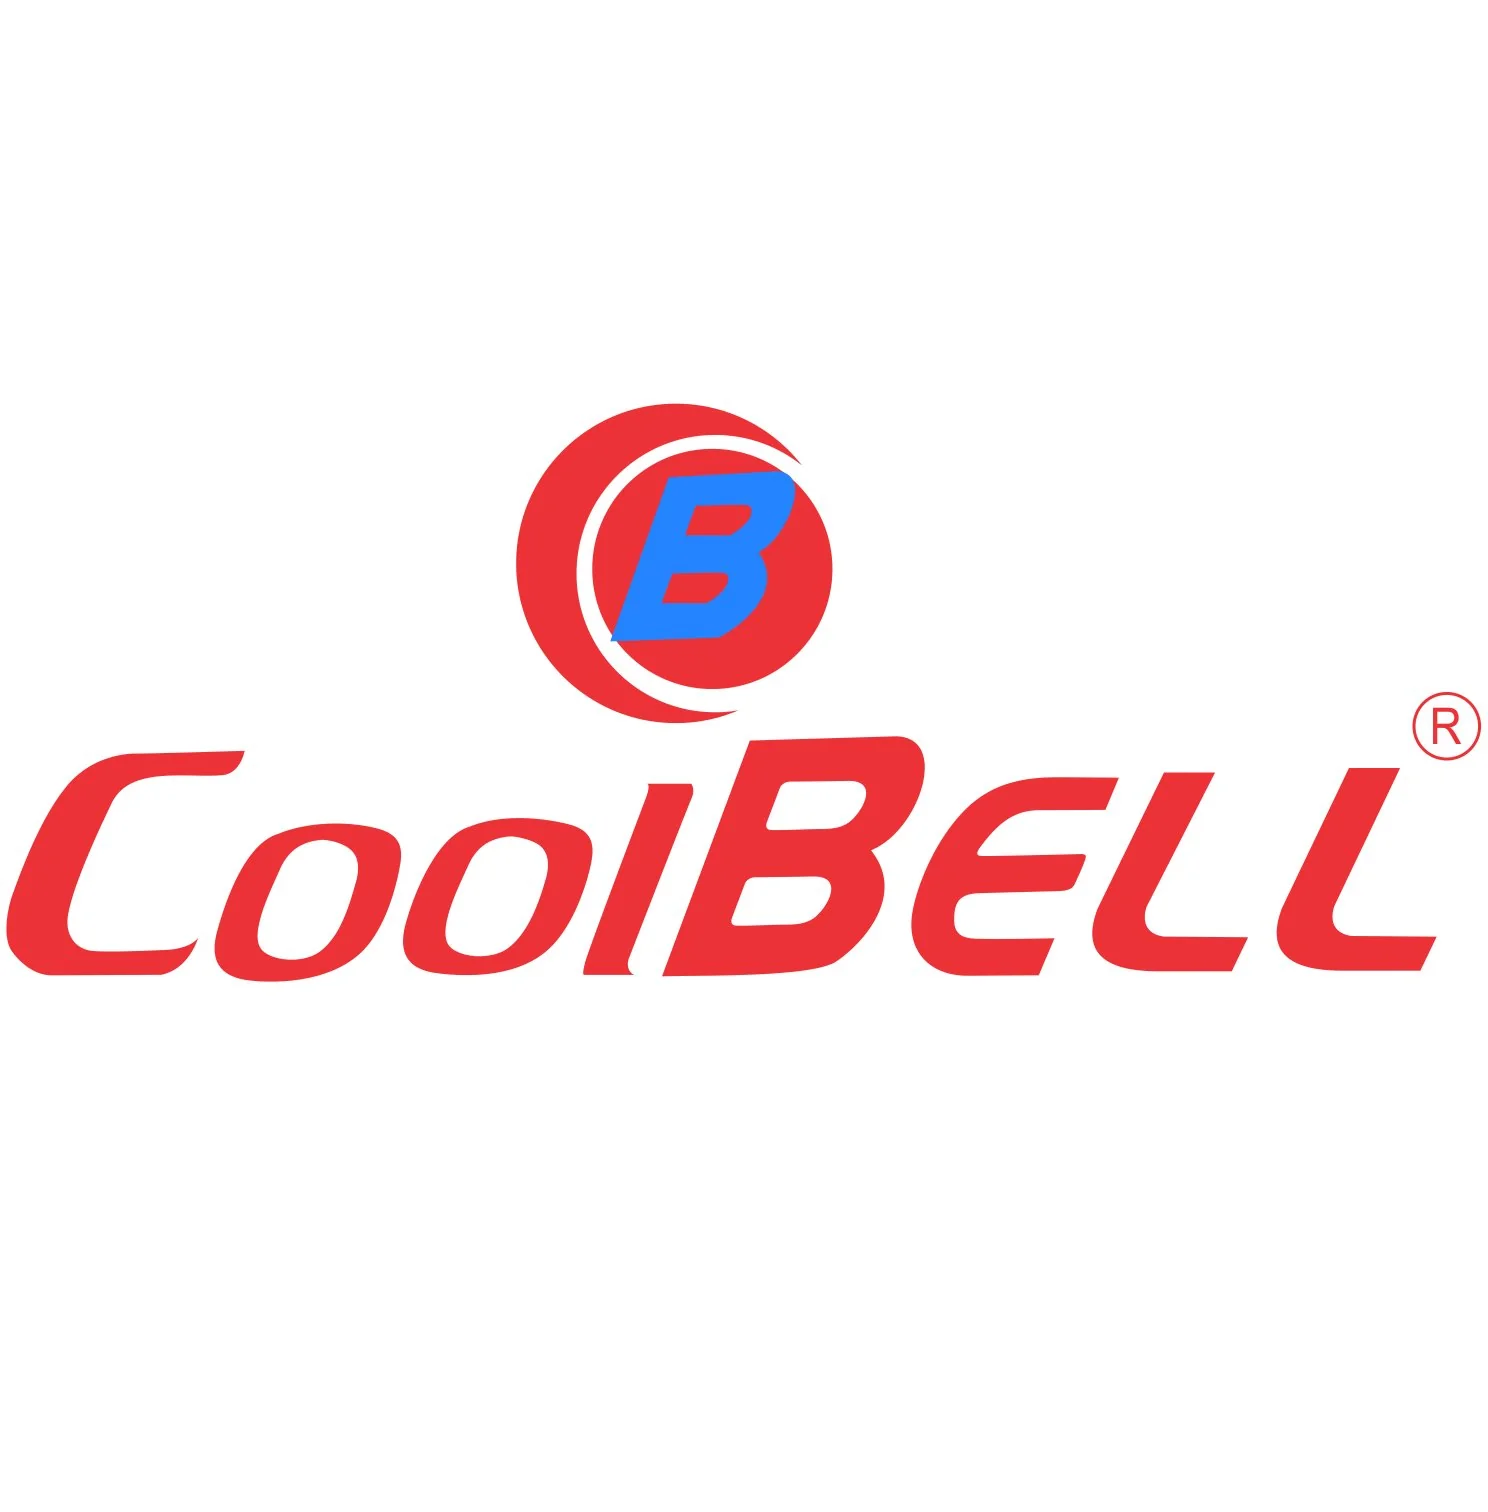 CoolBell